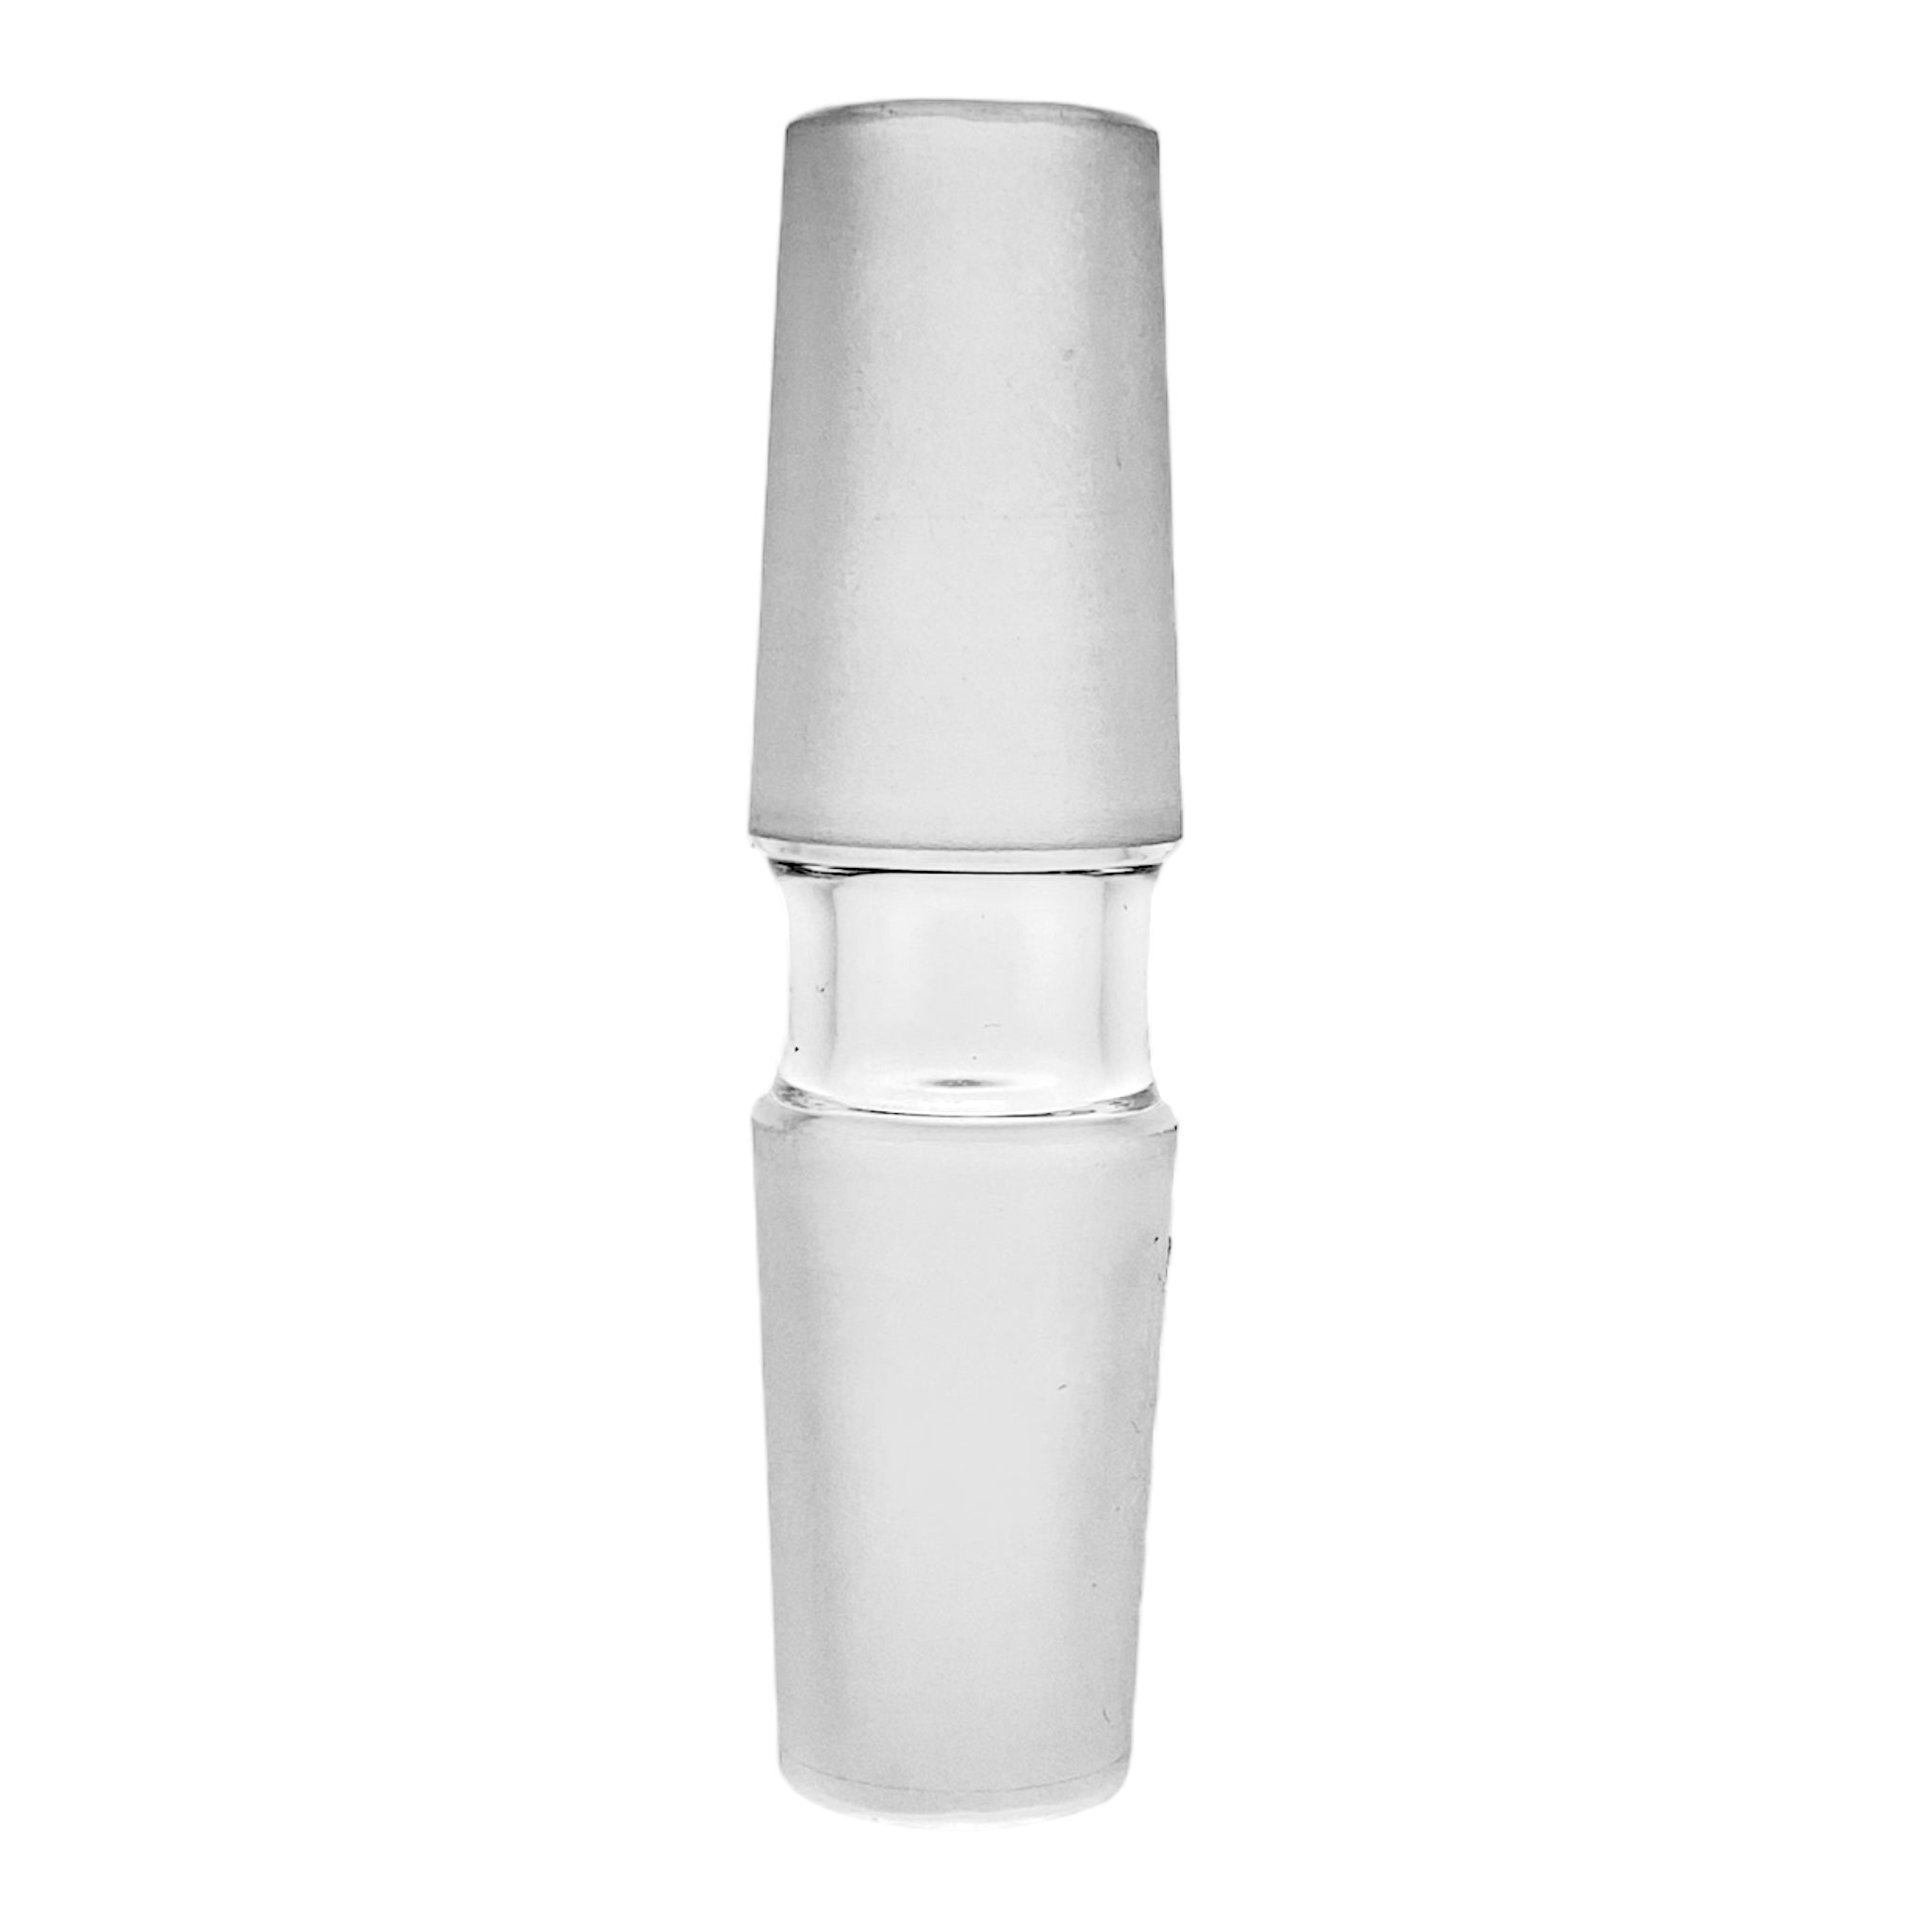 Glass Adapter For Bongs And Dab Rigs - 14mm Male To 14mm Male